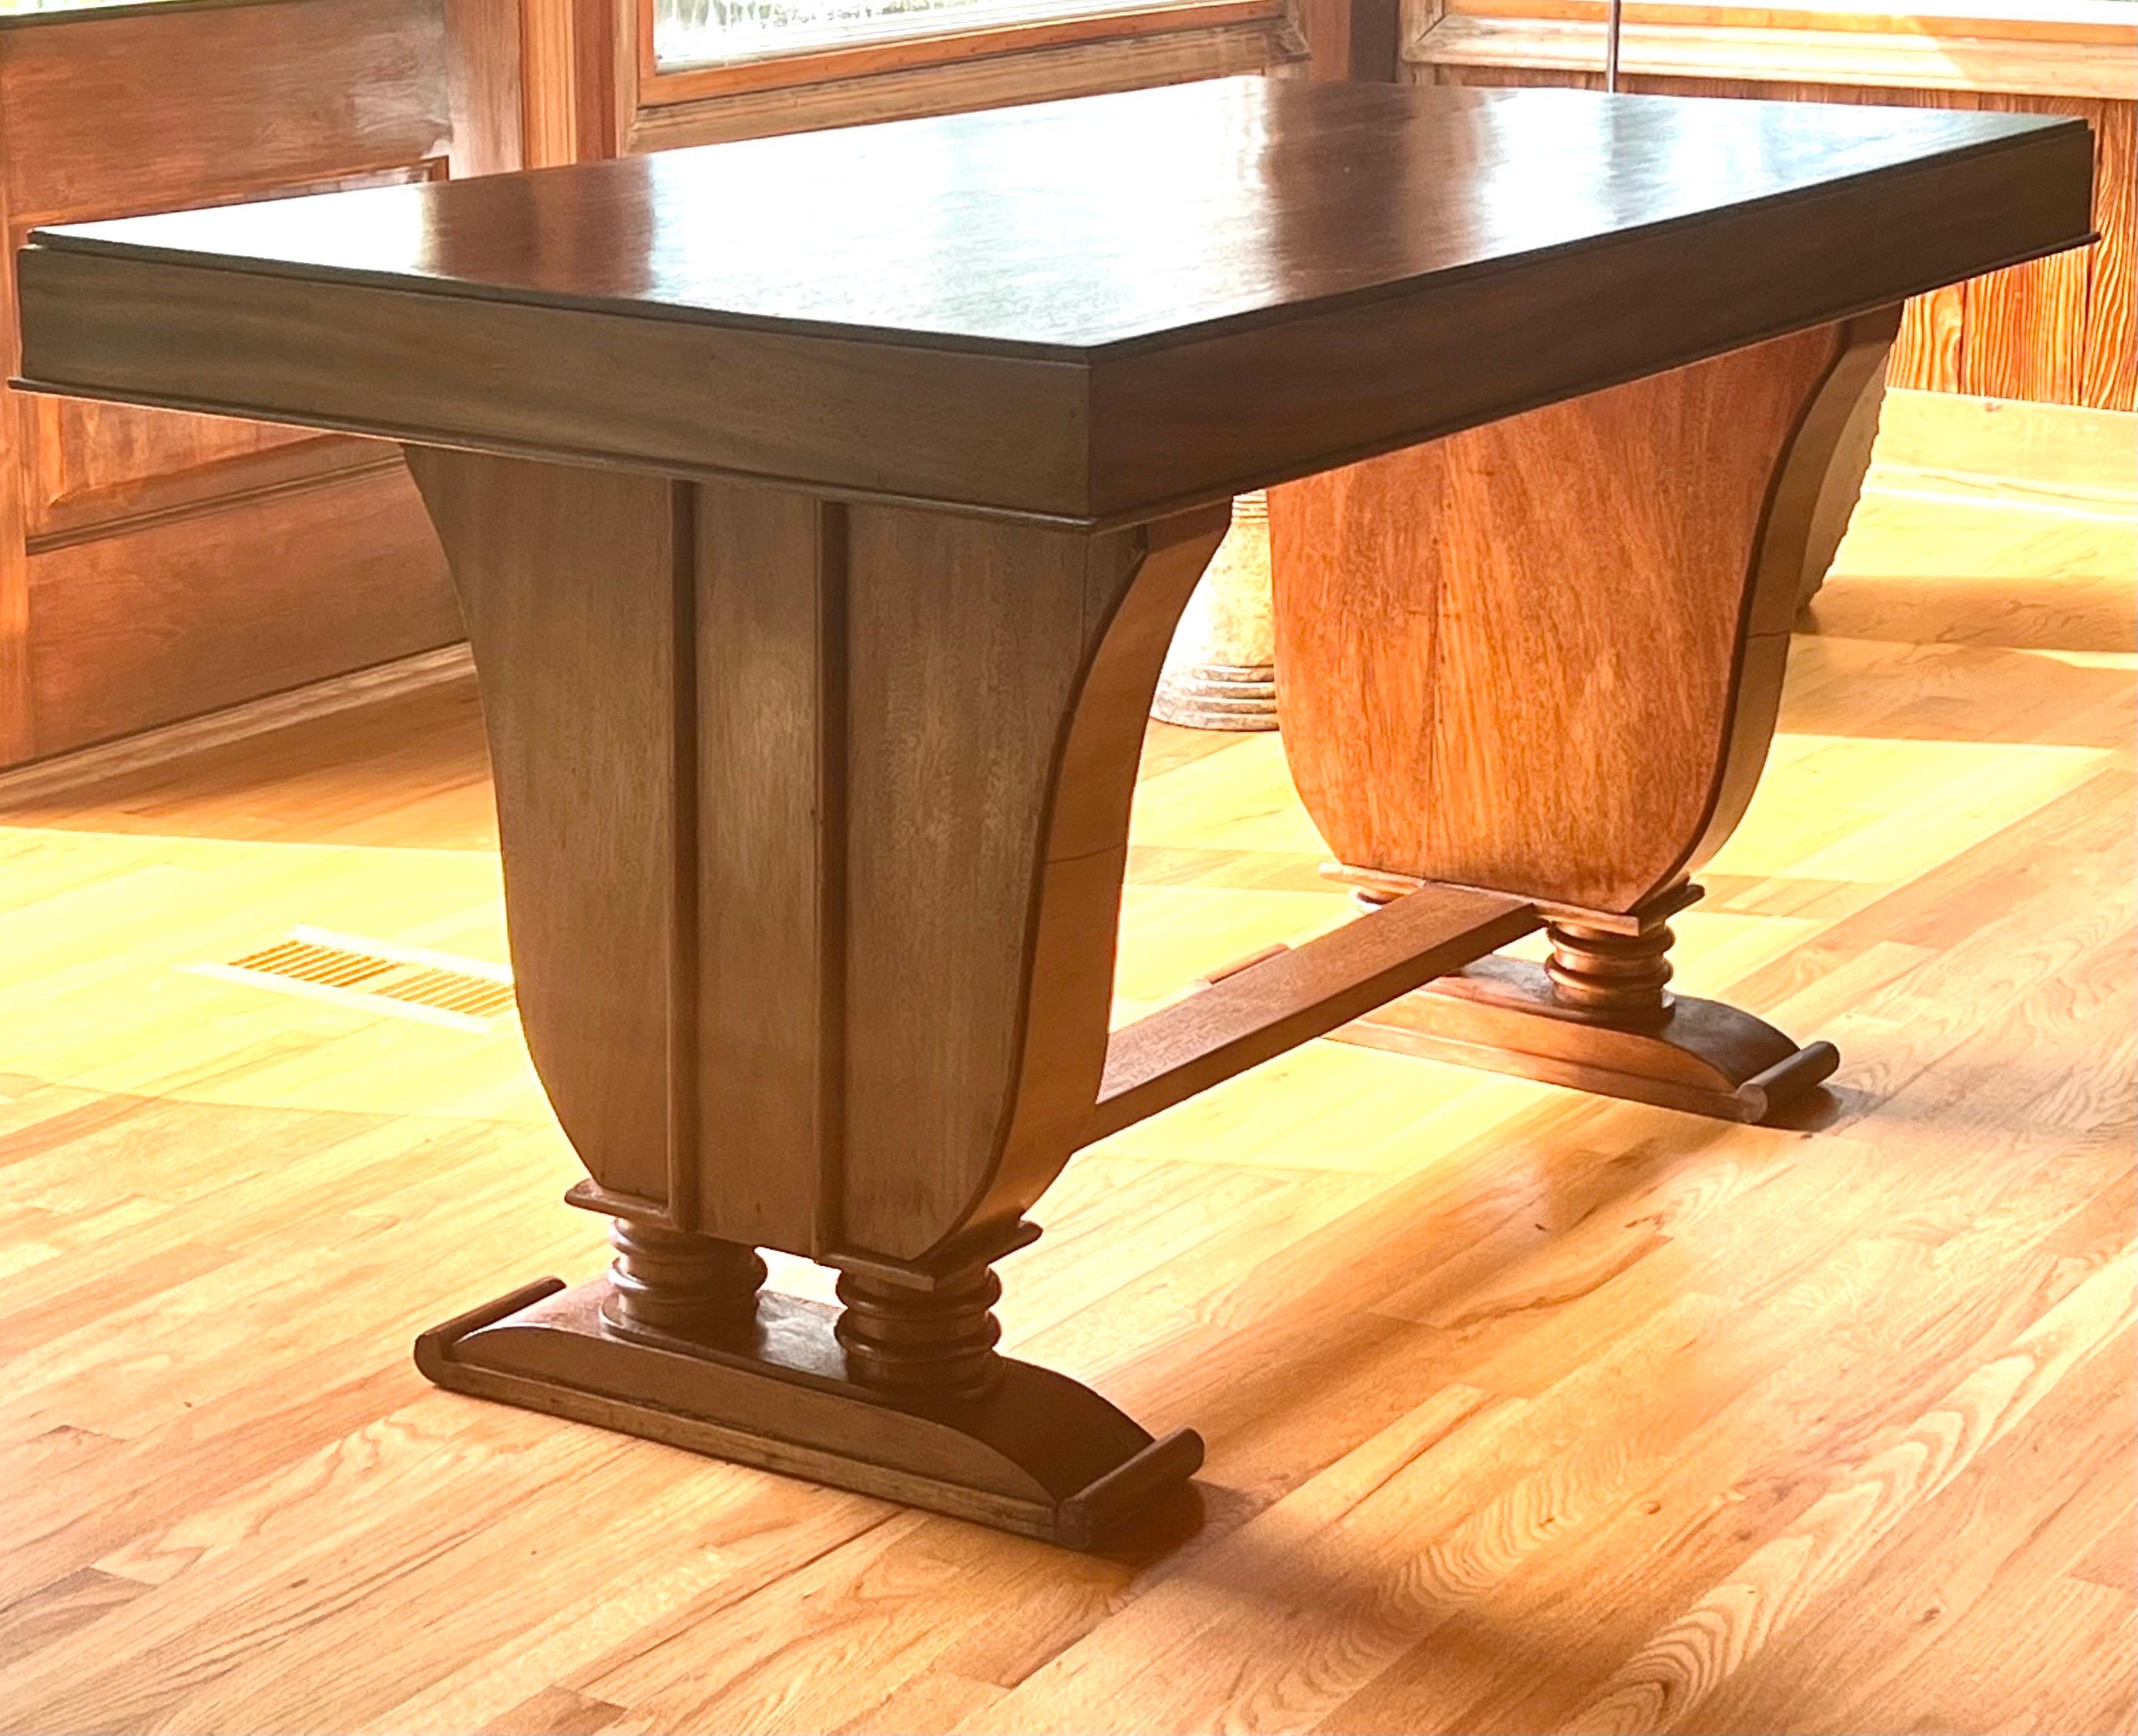 Rare French Art Deco Writing Table / Desk in Teak c. 1925, style of Andre Groult In Good Condition For Sale In New York, NY